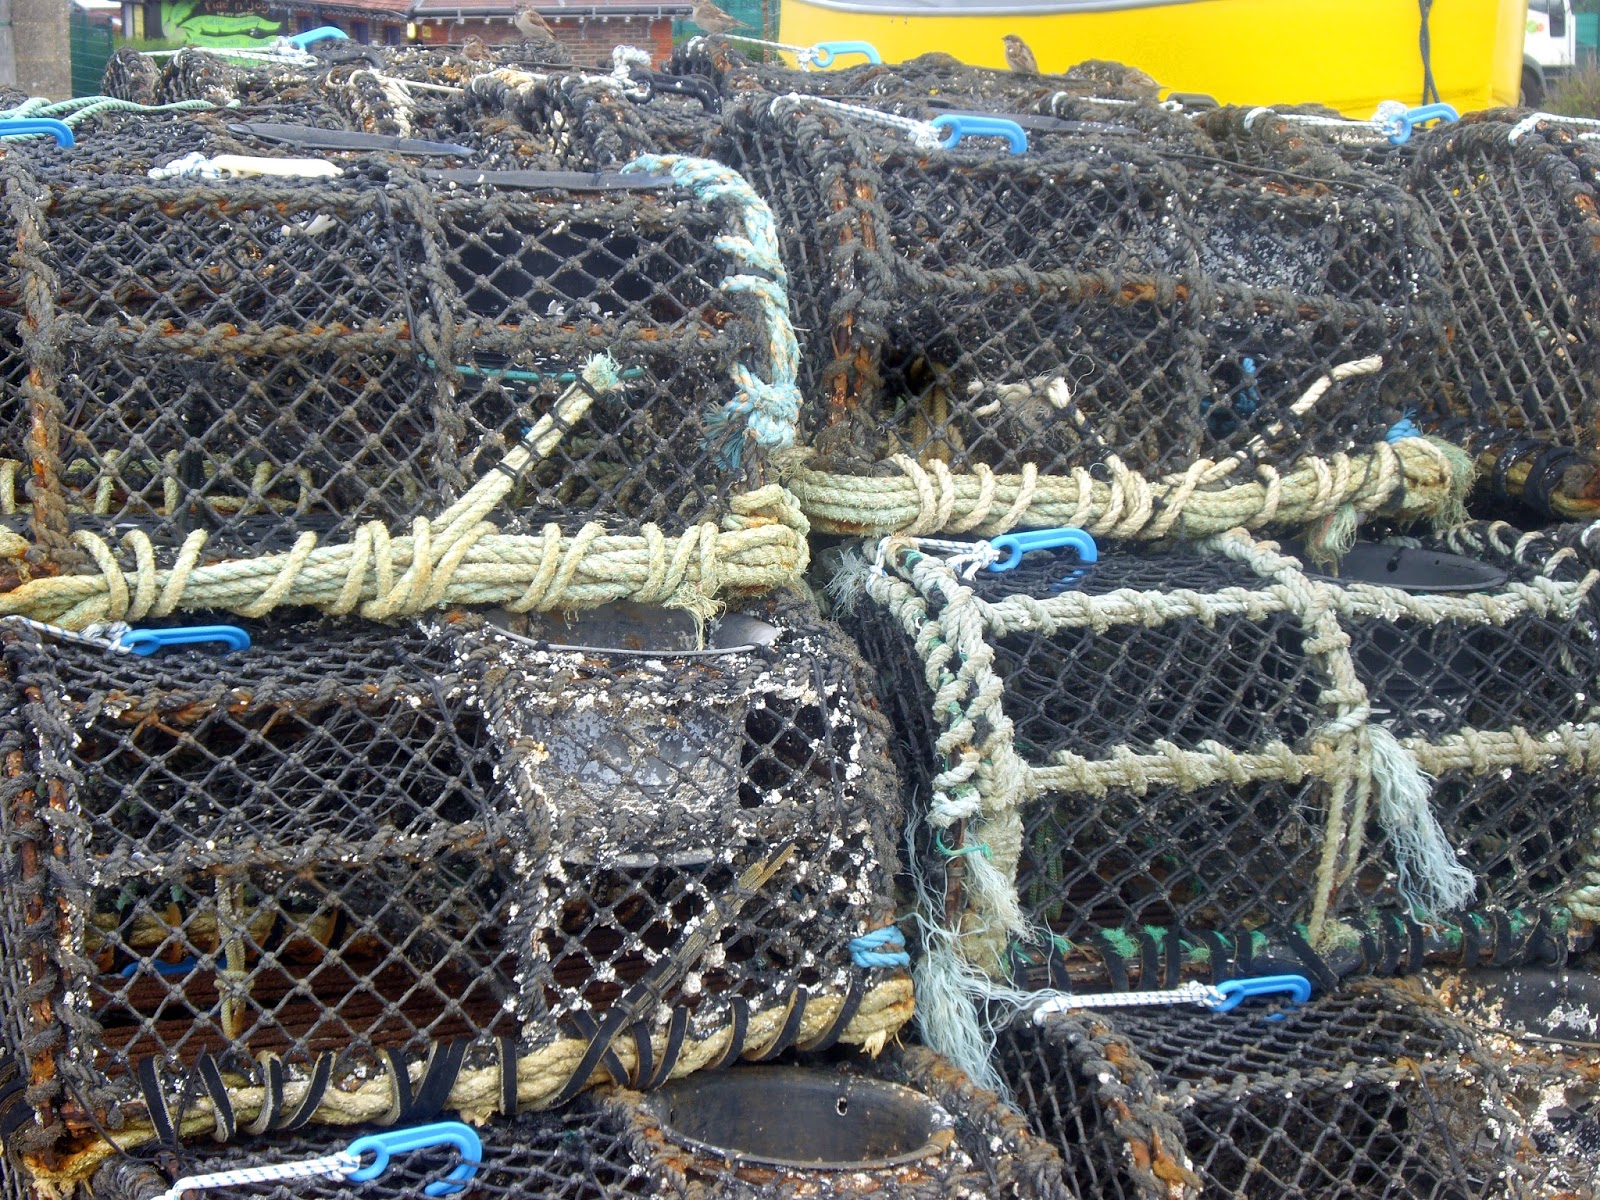 Tales from the Fabric of Life: Lobster baskets